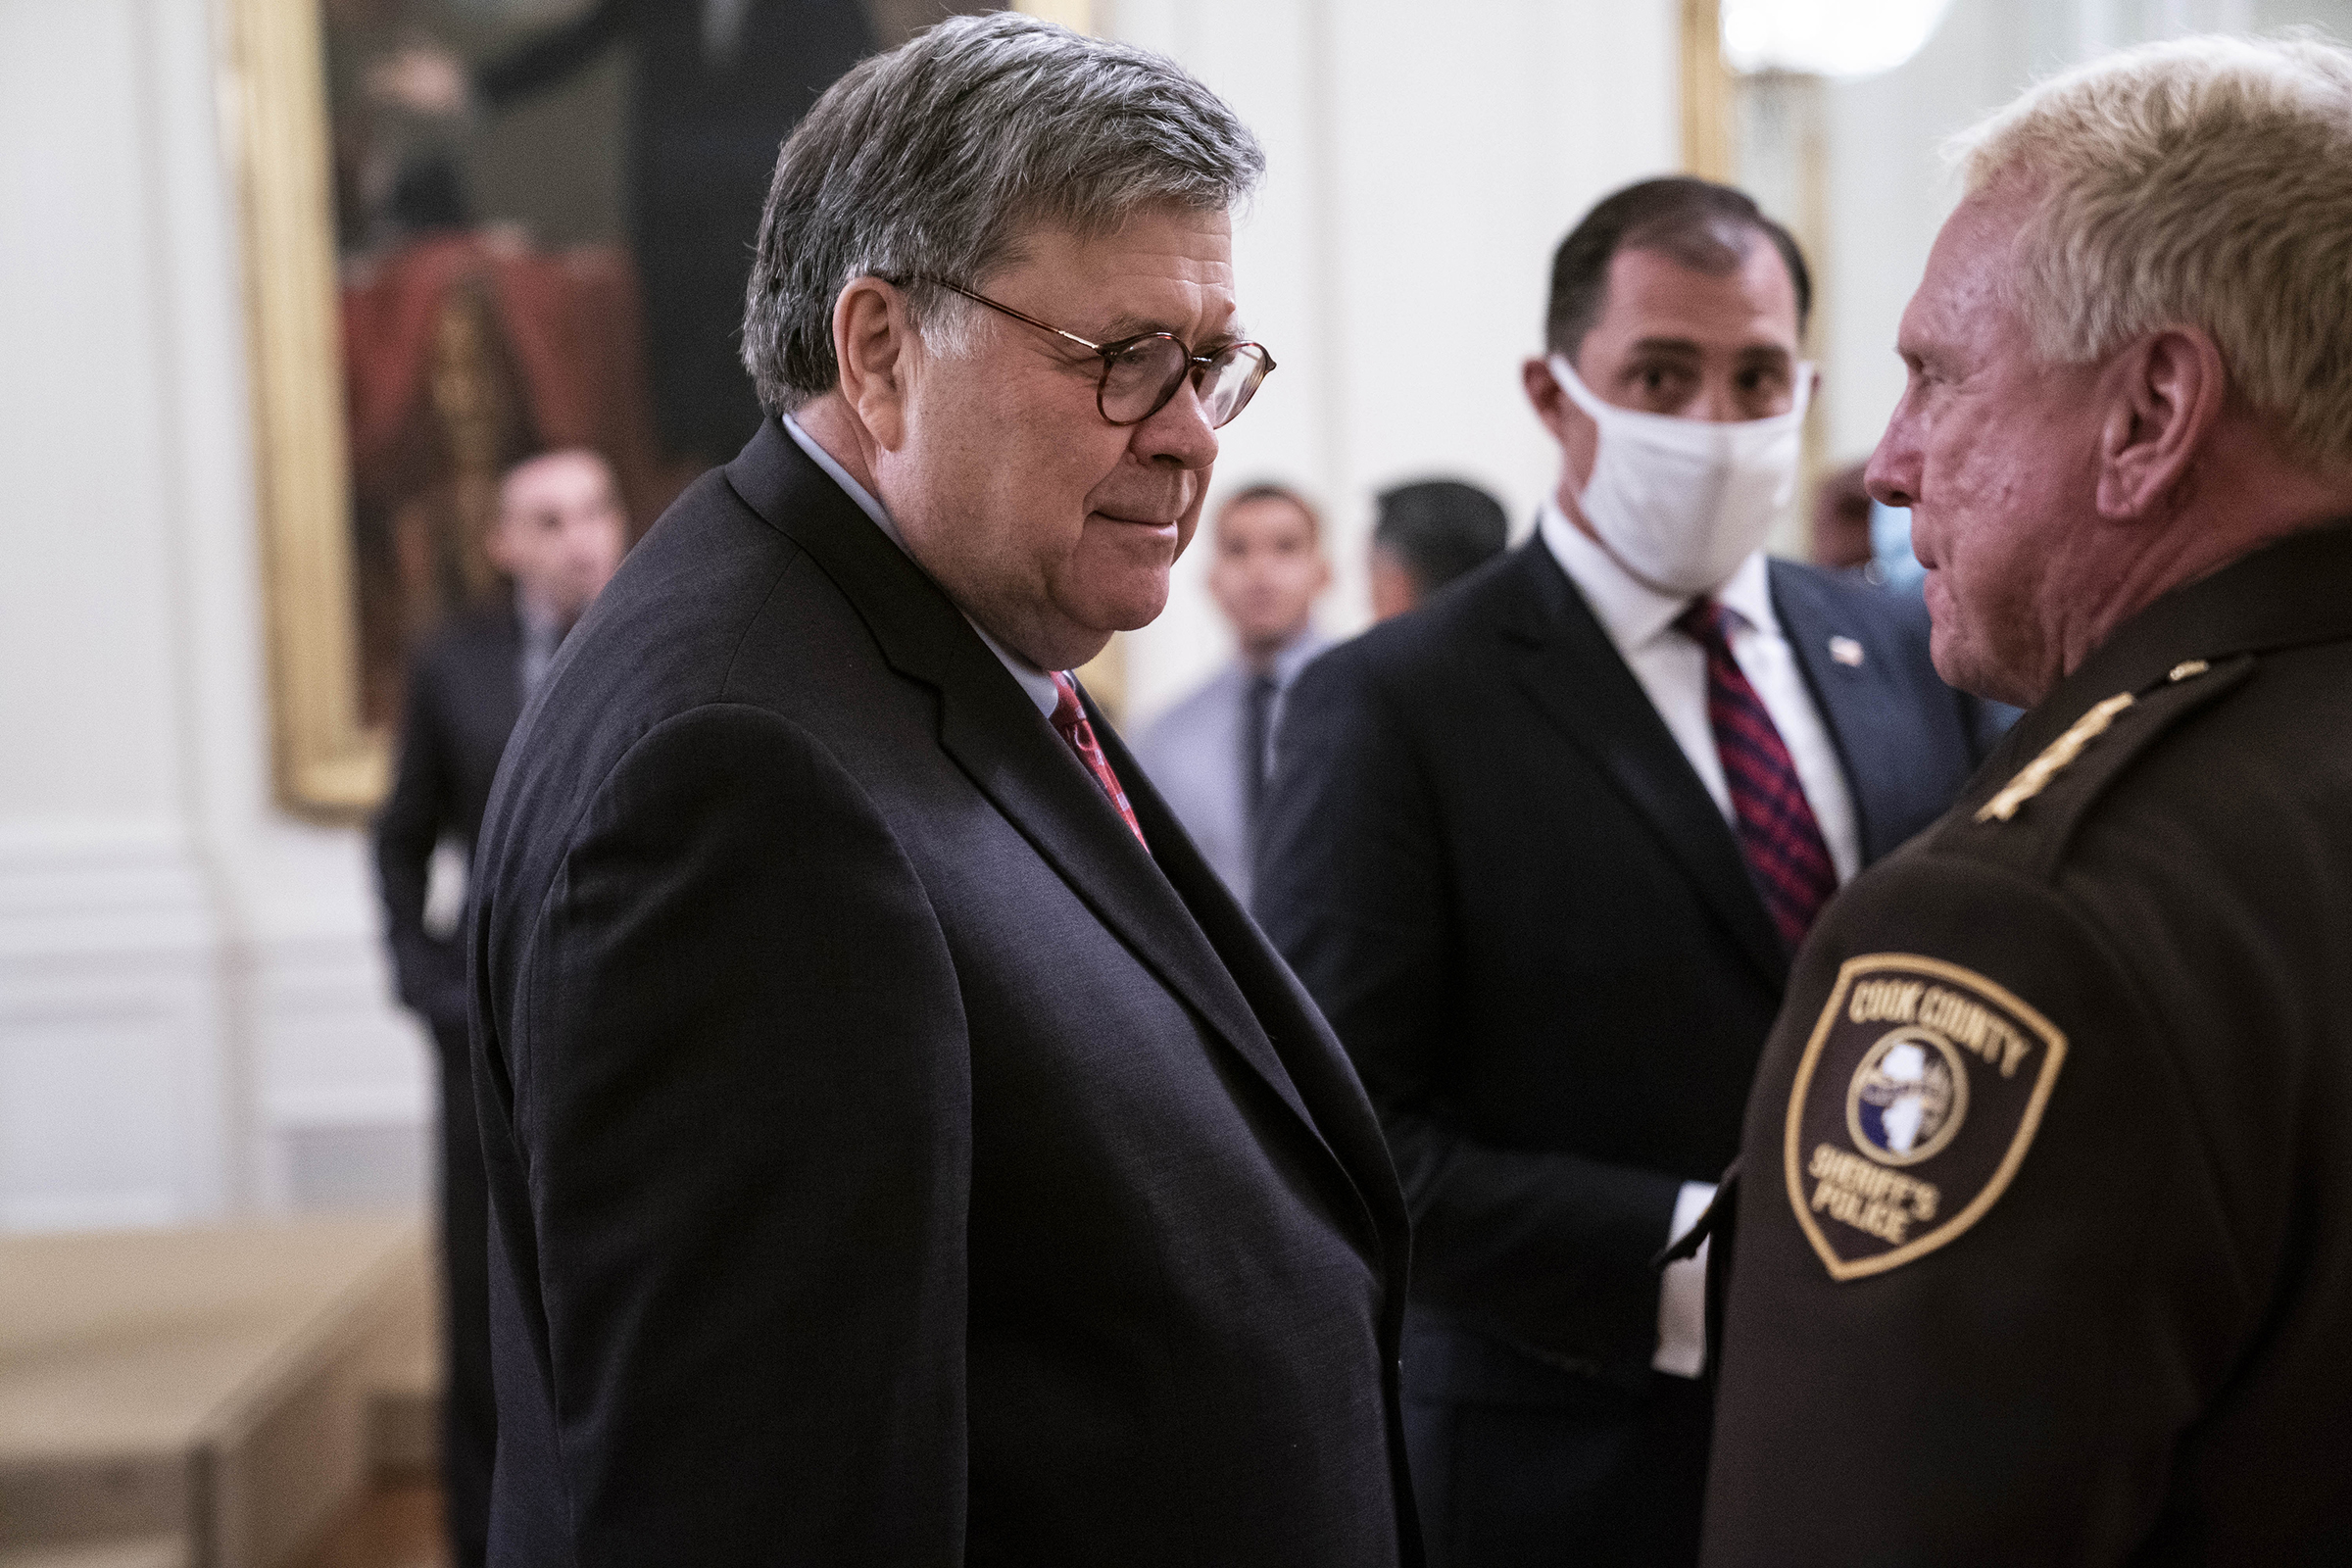 United States Attorney General William P. Barr is seen following remarks from U.S. President Donald Trump on 'Operation Legend: Combatting Violent Crime in American Cities' at the White House in Washington, D.C. on July 22, 2020. (Polaris)